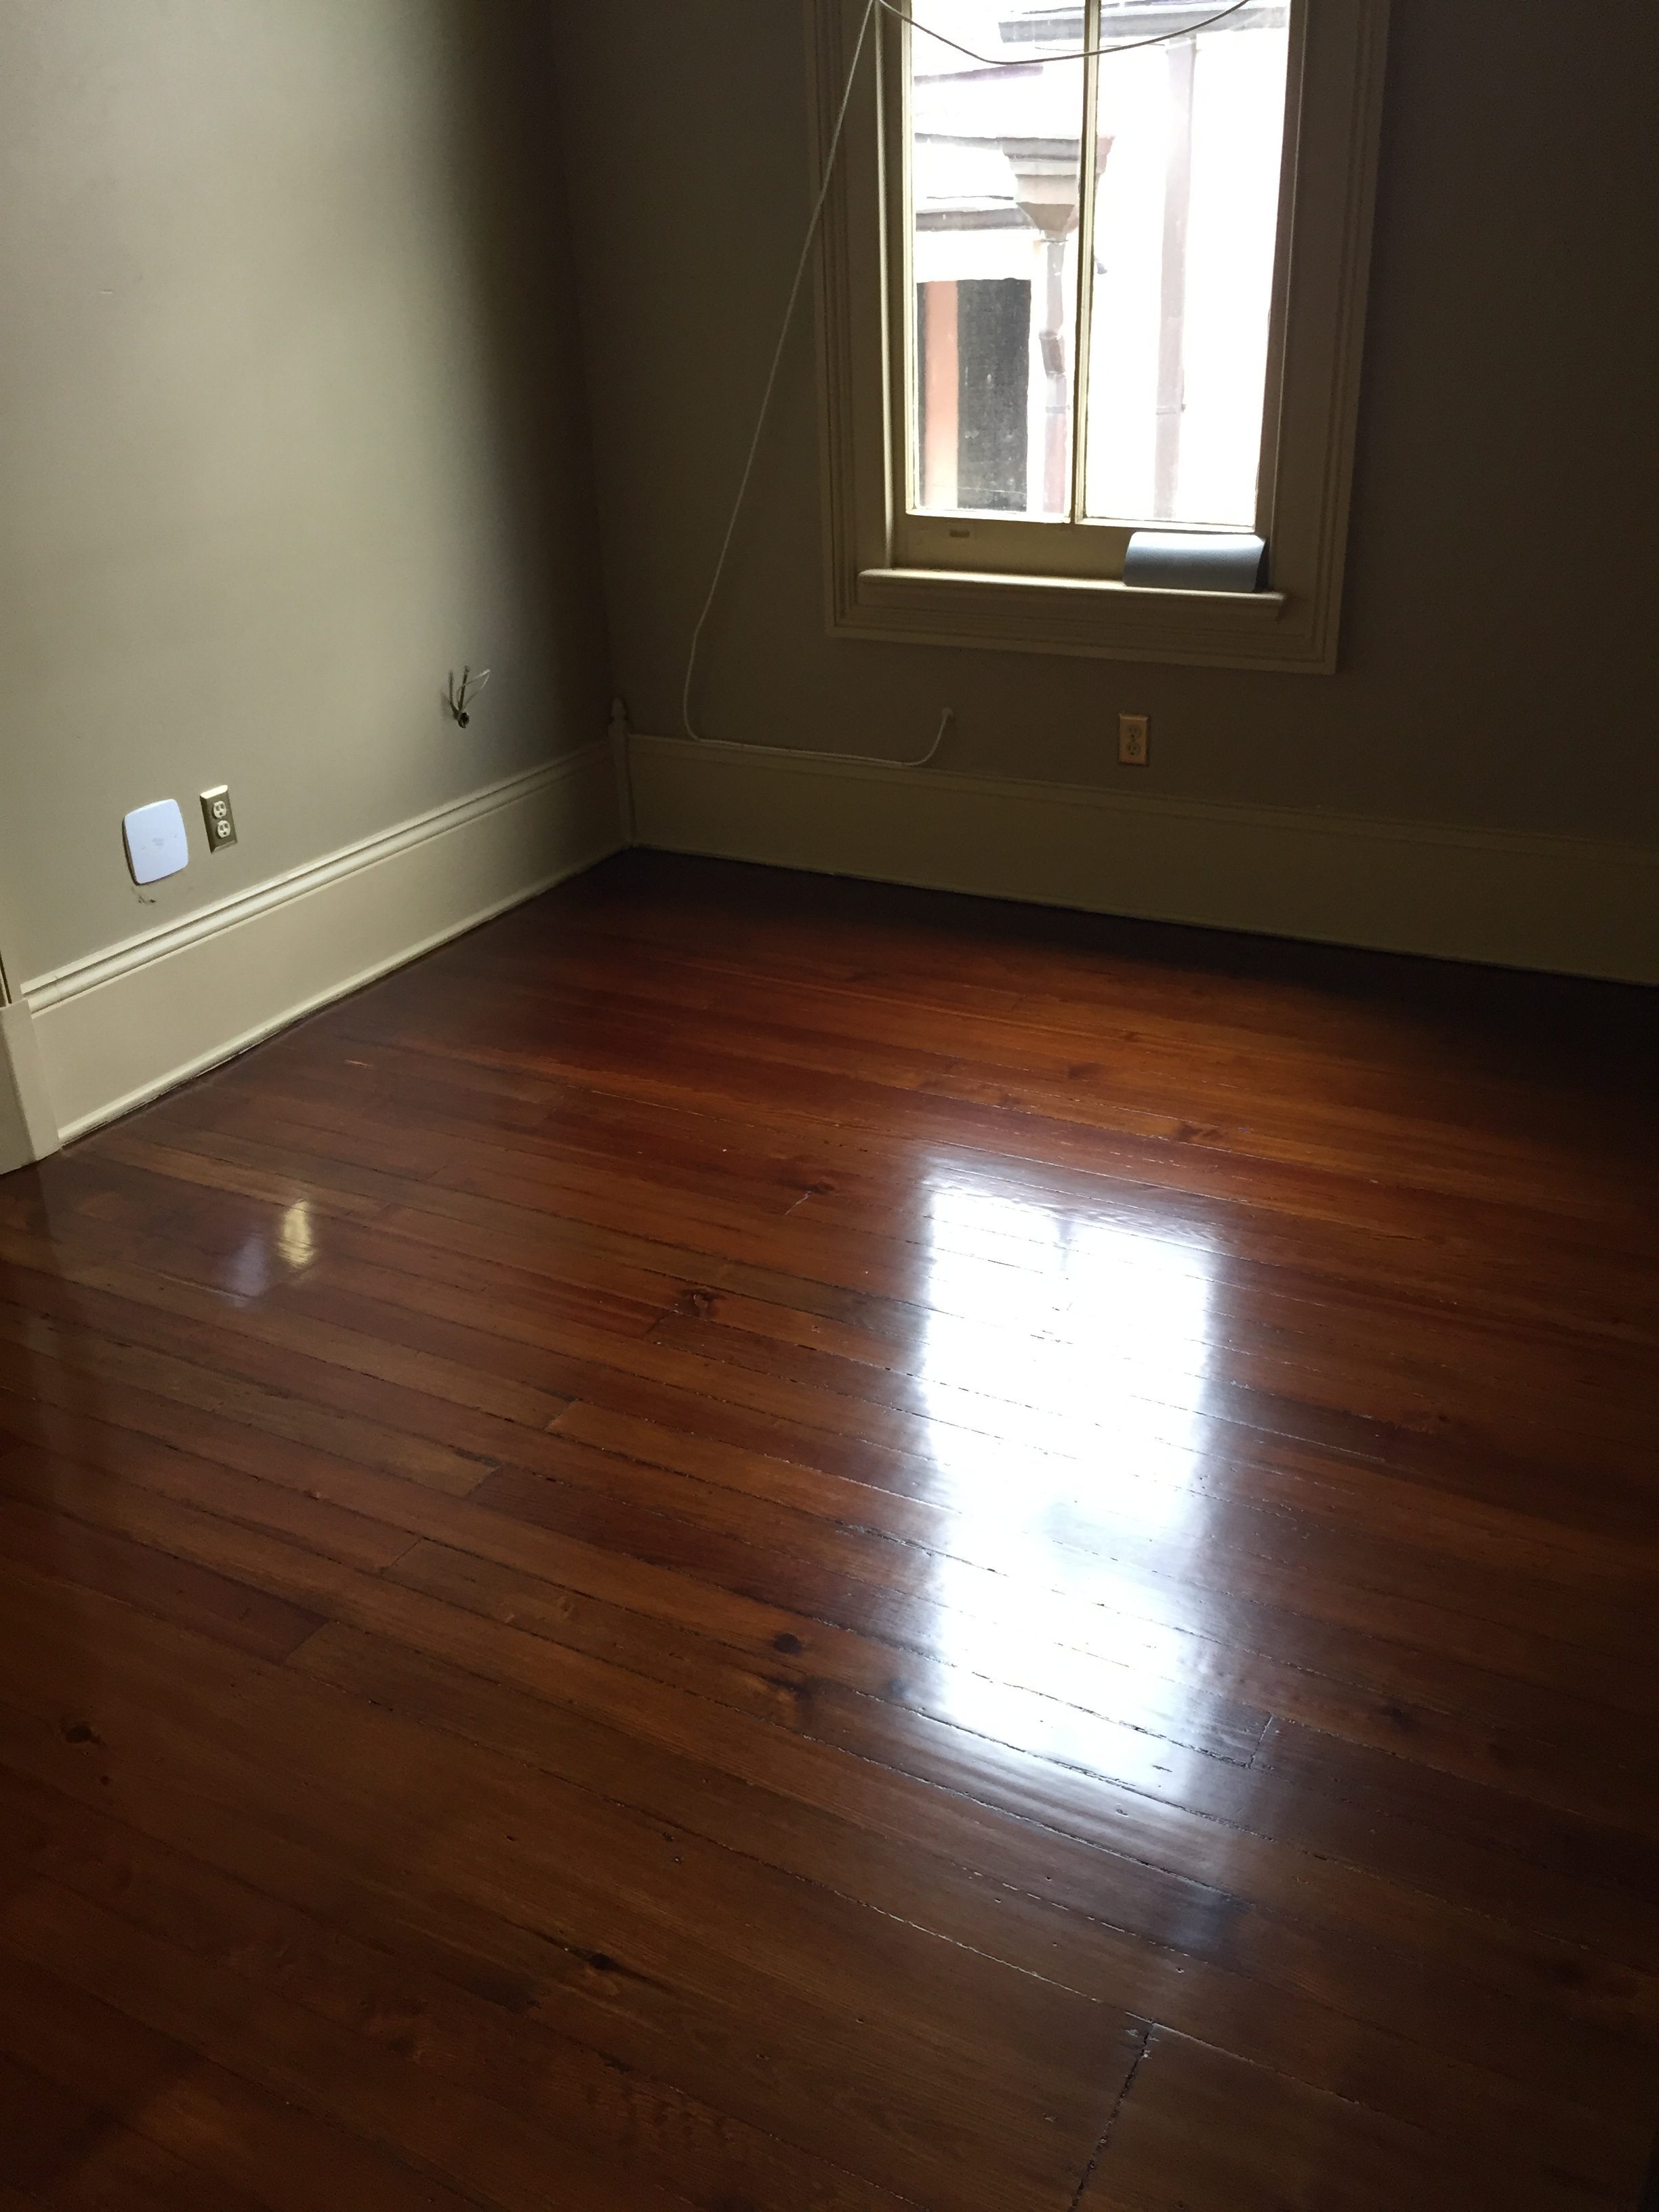 This is a bedroom of refinished hardwood pine floors.